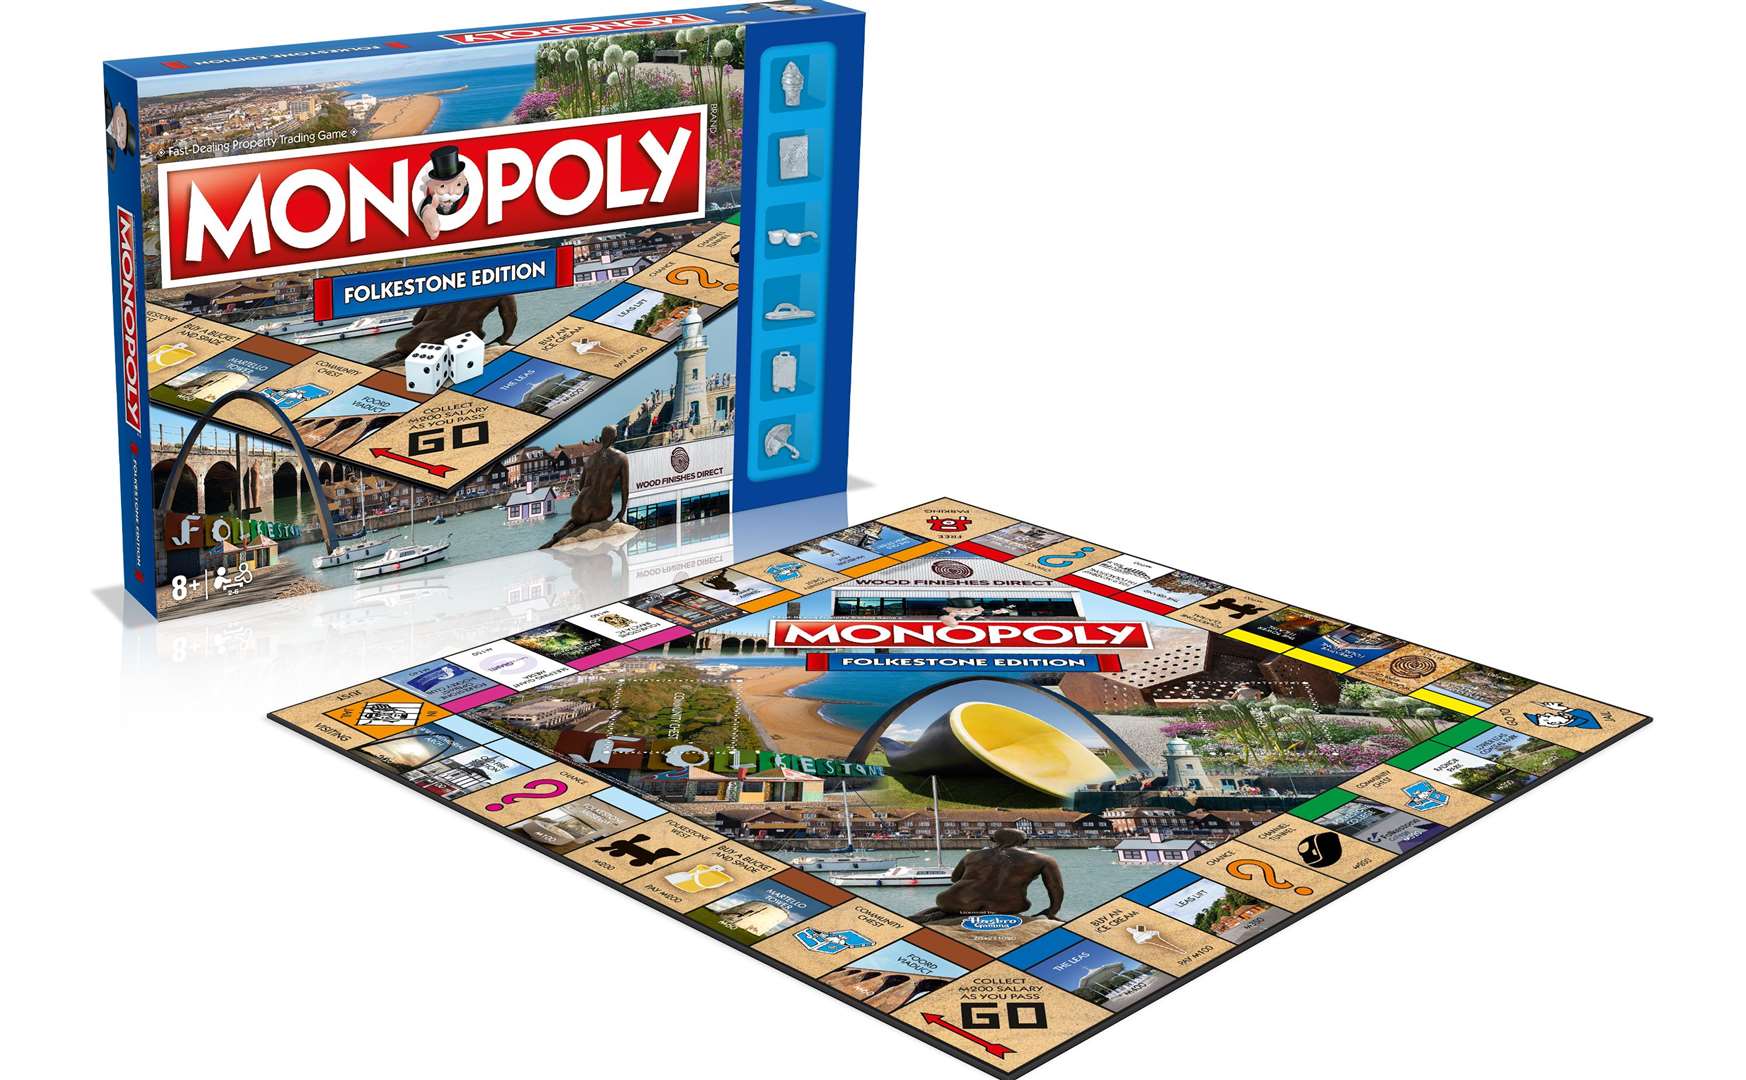 Folkestone's very own Monopoly game has now launched